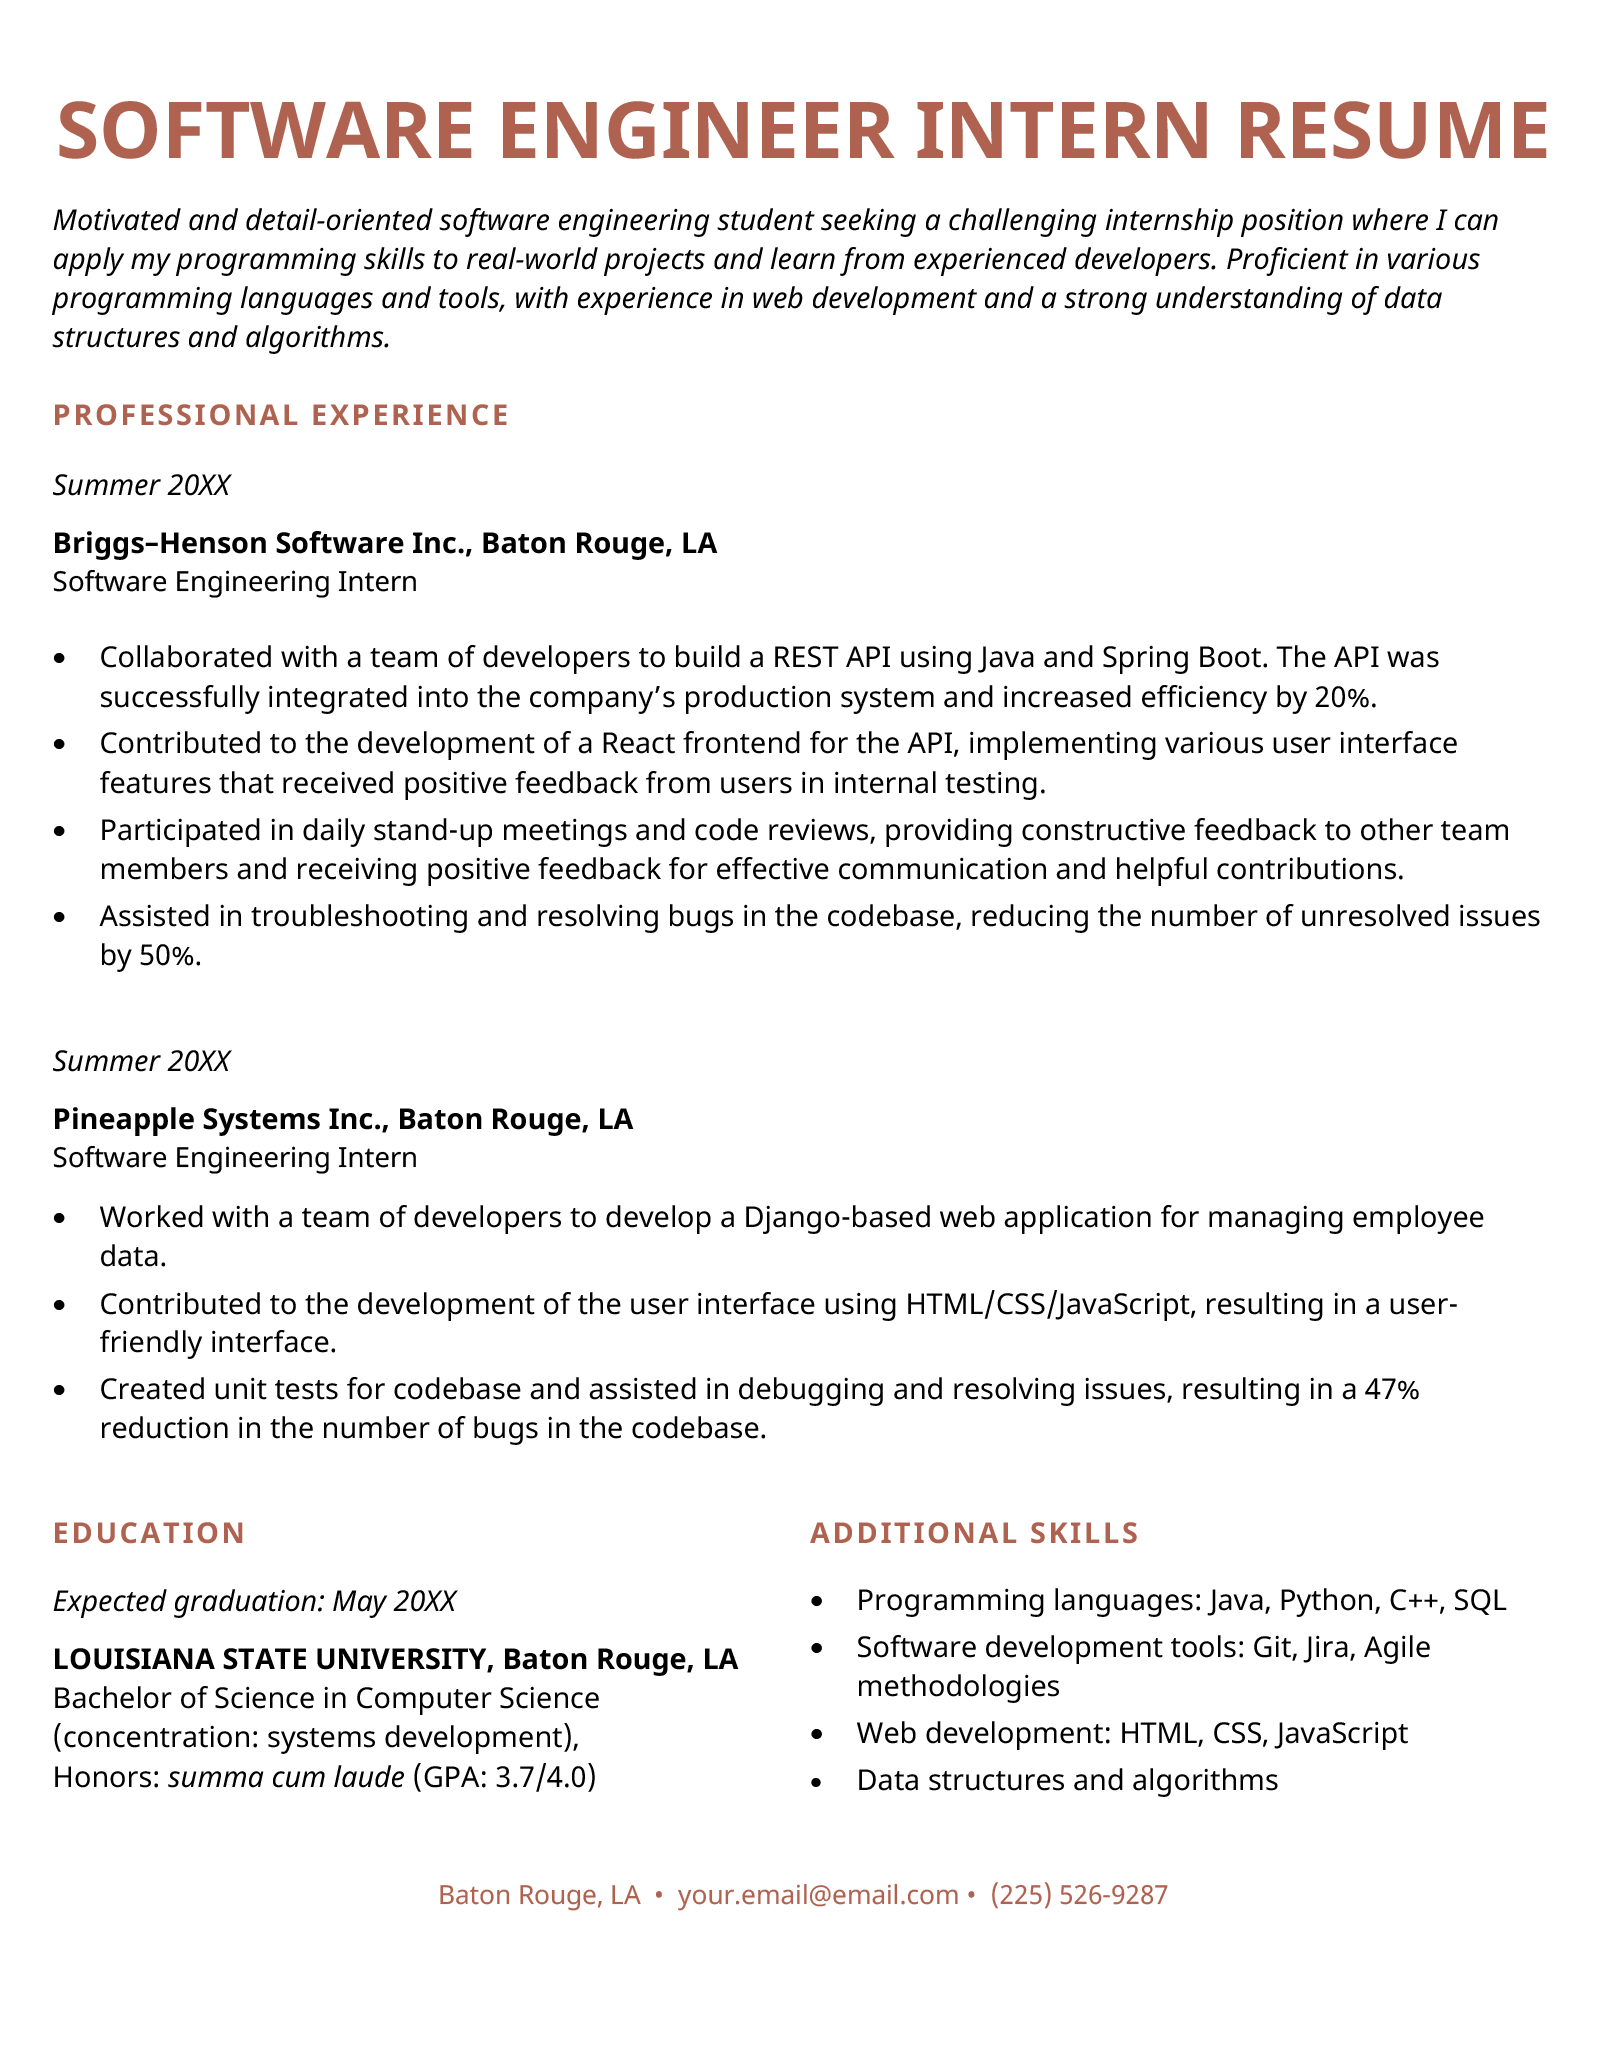 An example resume for a software engineering internship.